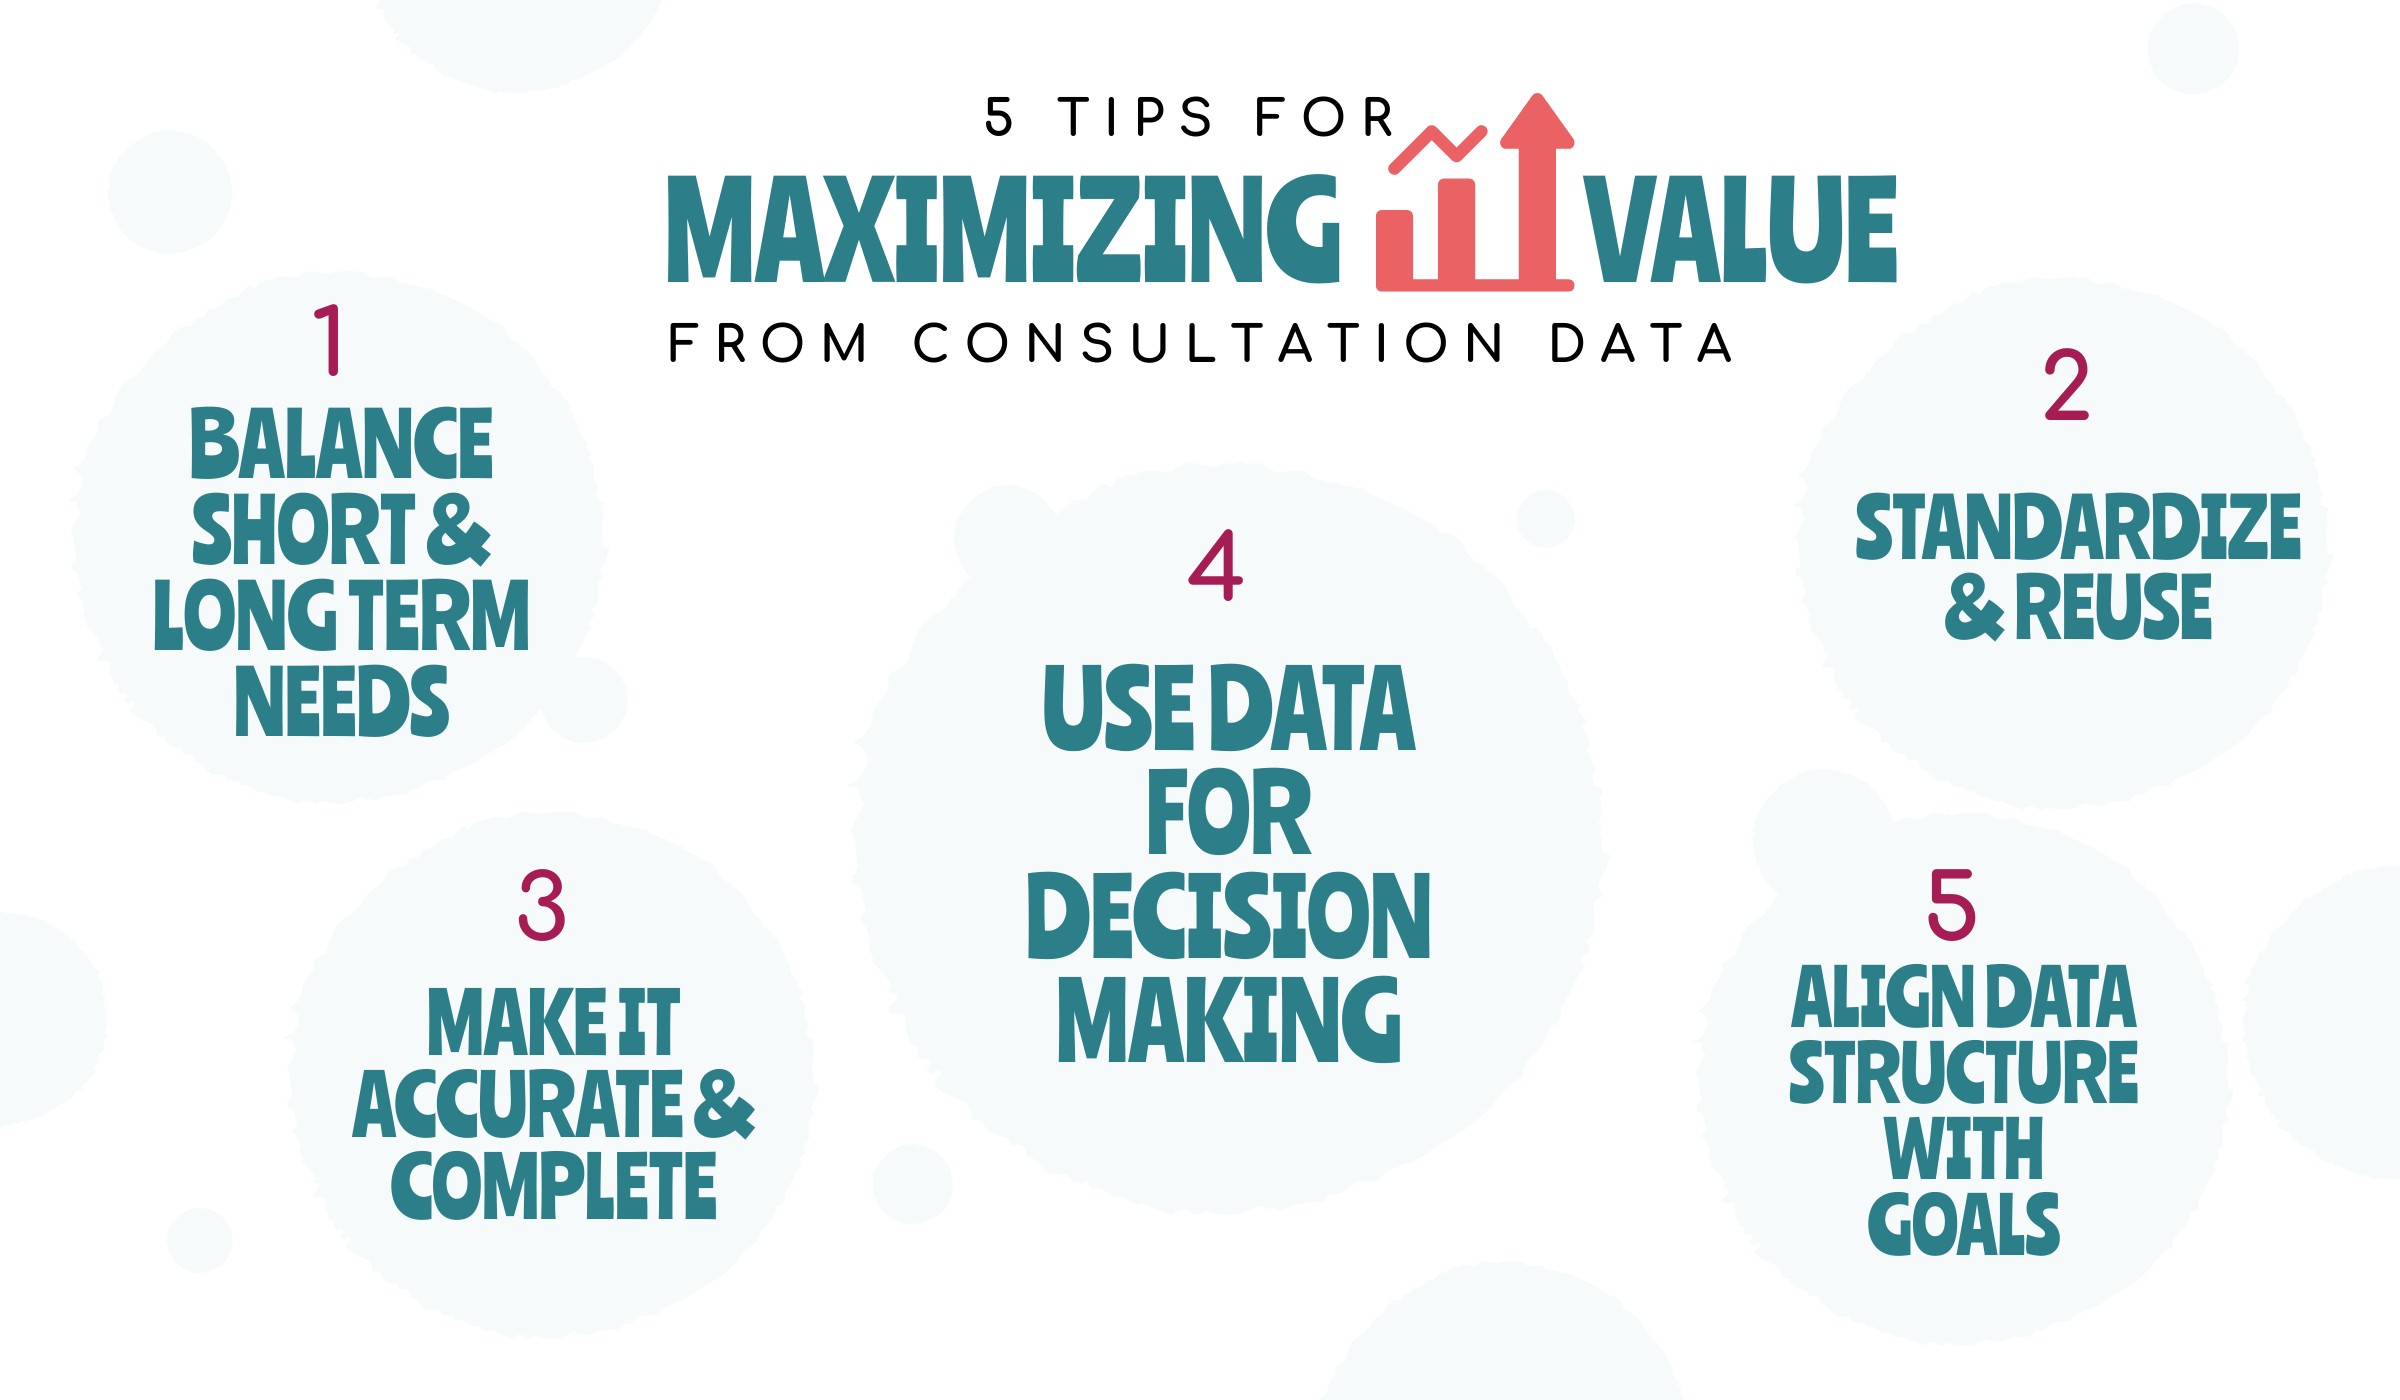 An infographic illustrating 5 tips to maximize engagement data value.